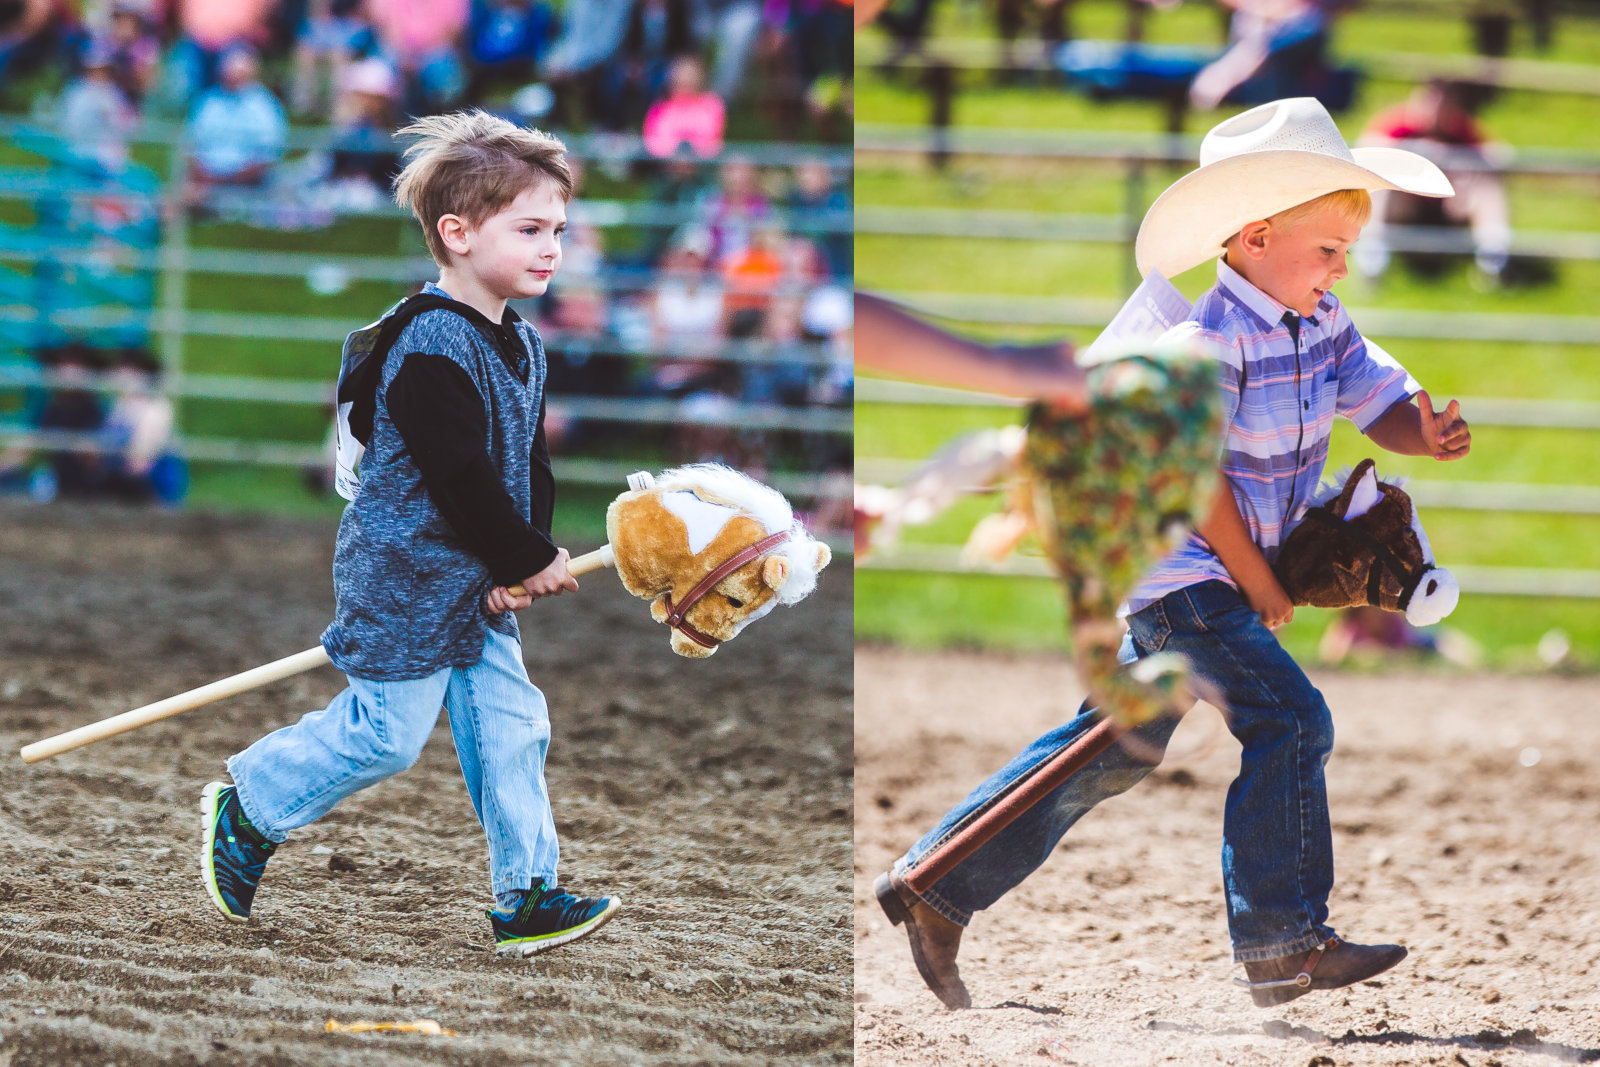 Collage of two stick-horse competitors at the Ellicottville Rodeo in July 2018